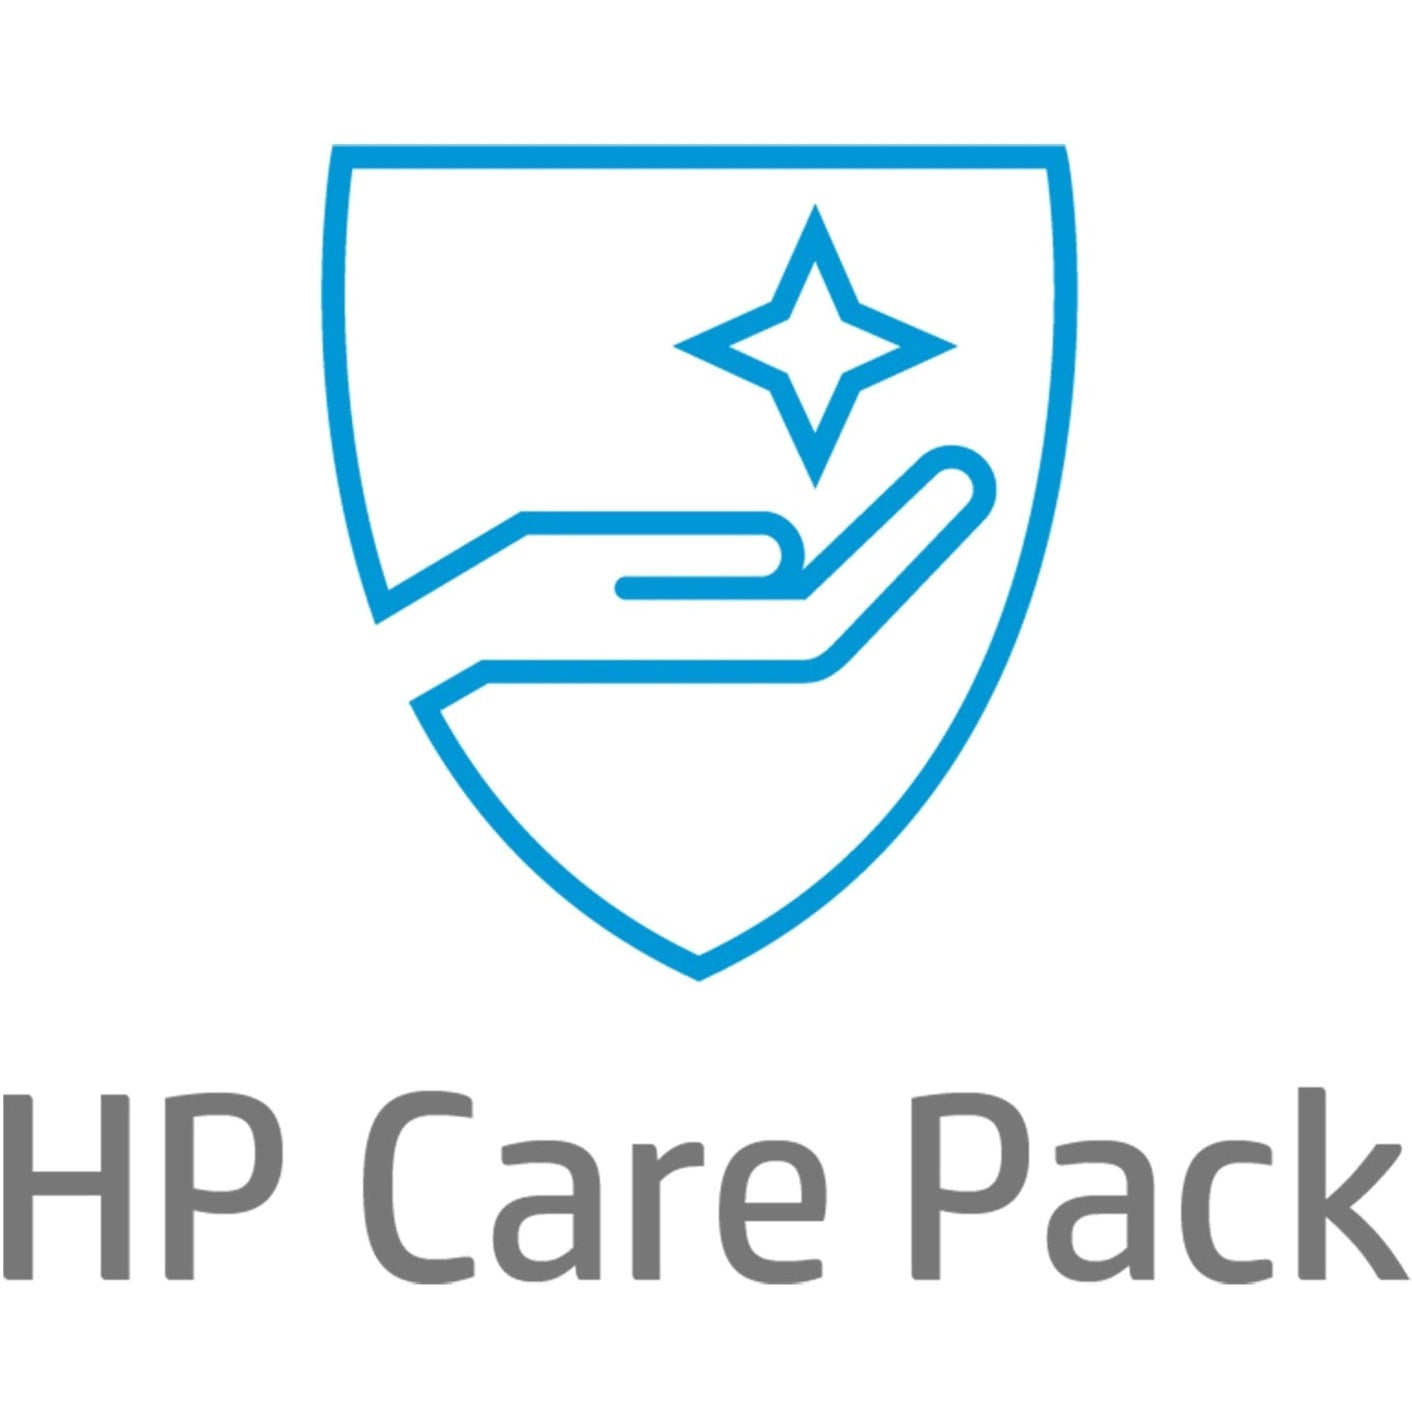 HP Care Pack - Extended Service - 3 Year - Service (UN016E)